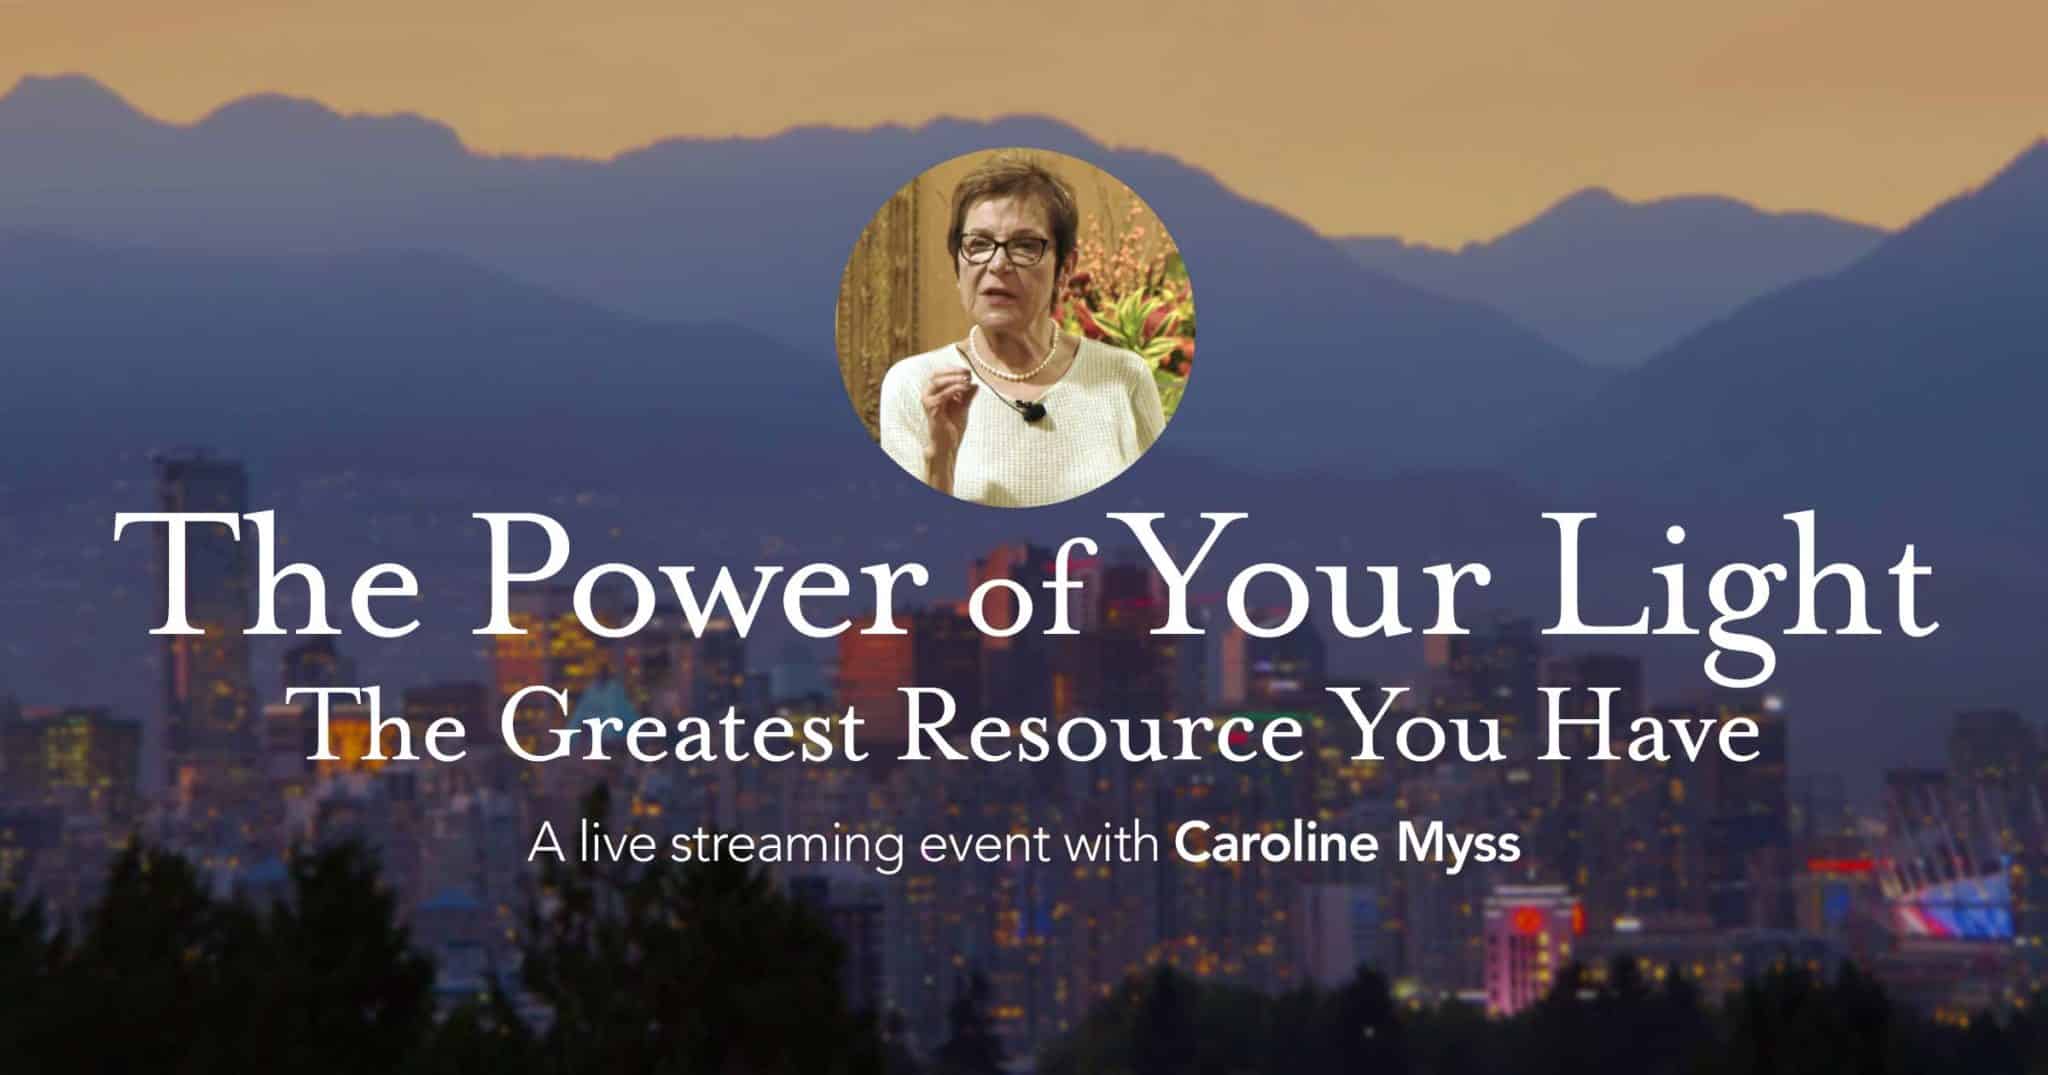 The Power of Your Light: The Greatest Resource You Have. A live streaming event with Caroline Myss